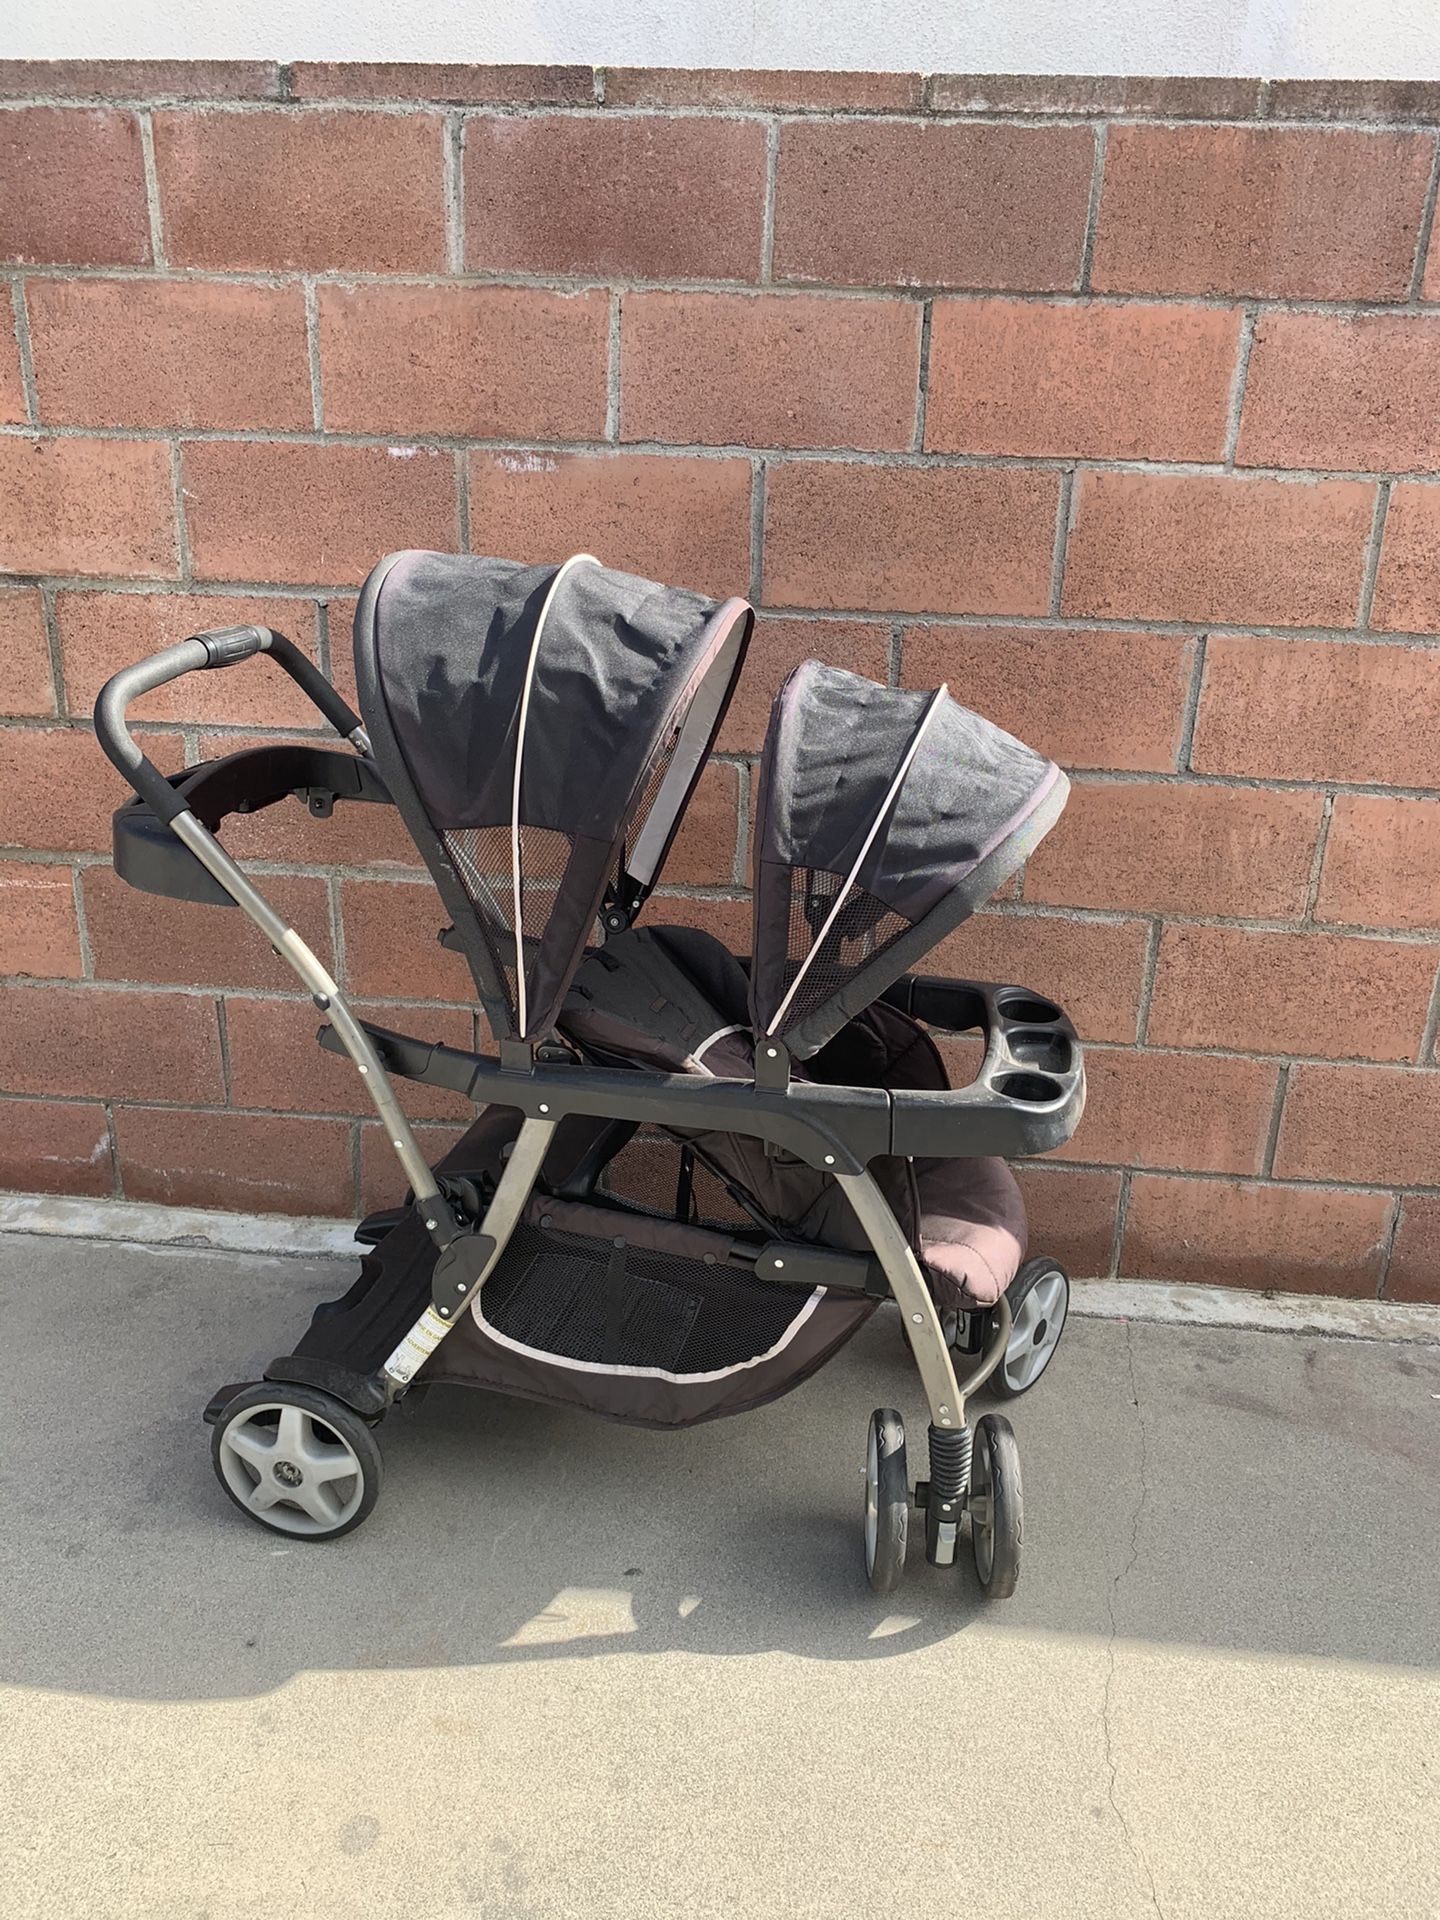 Graco double stroller (PRICE FIRM)